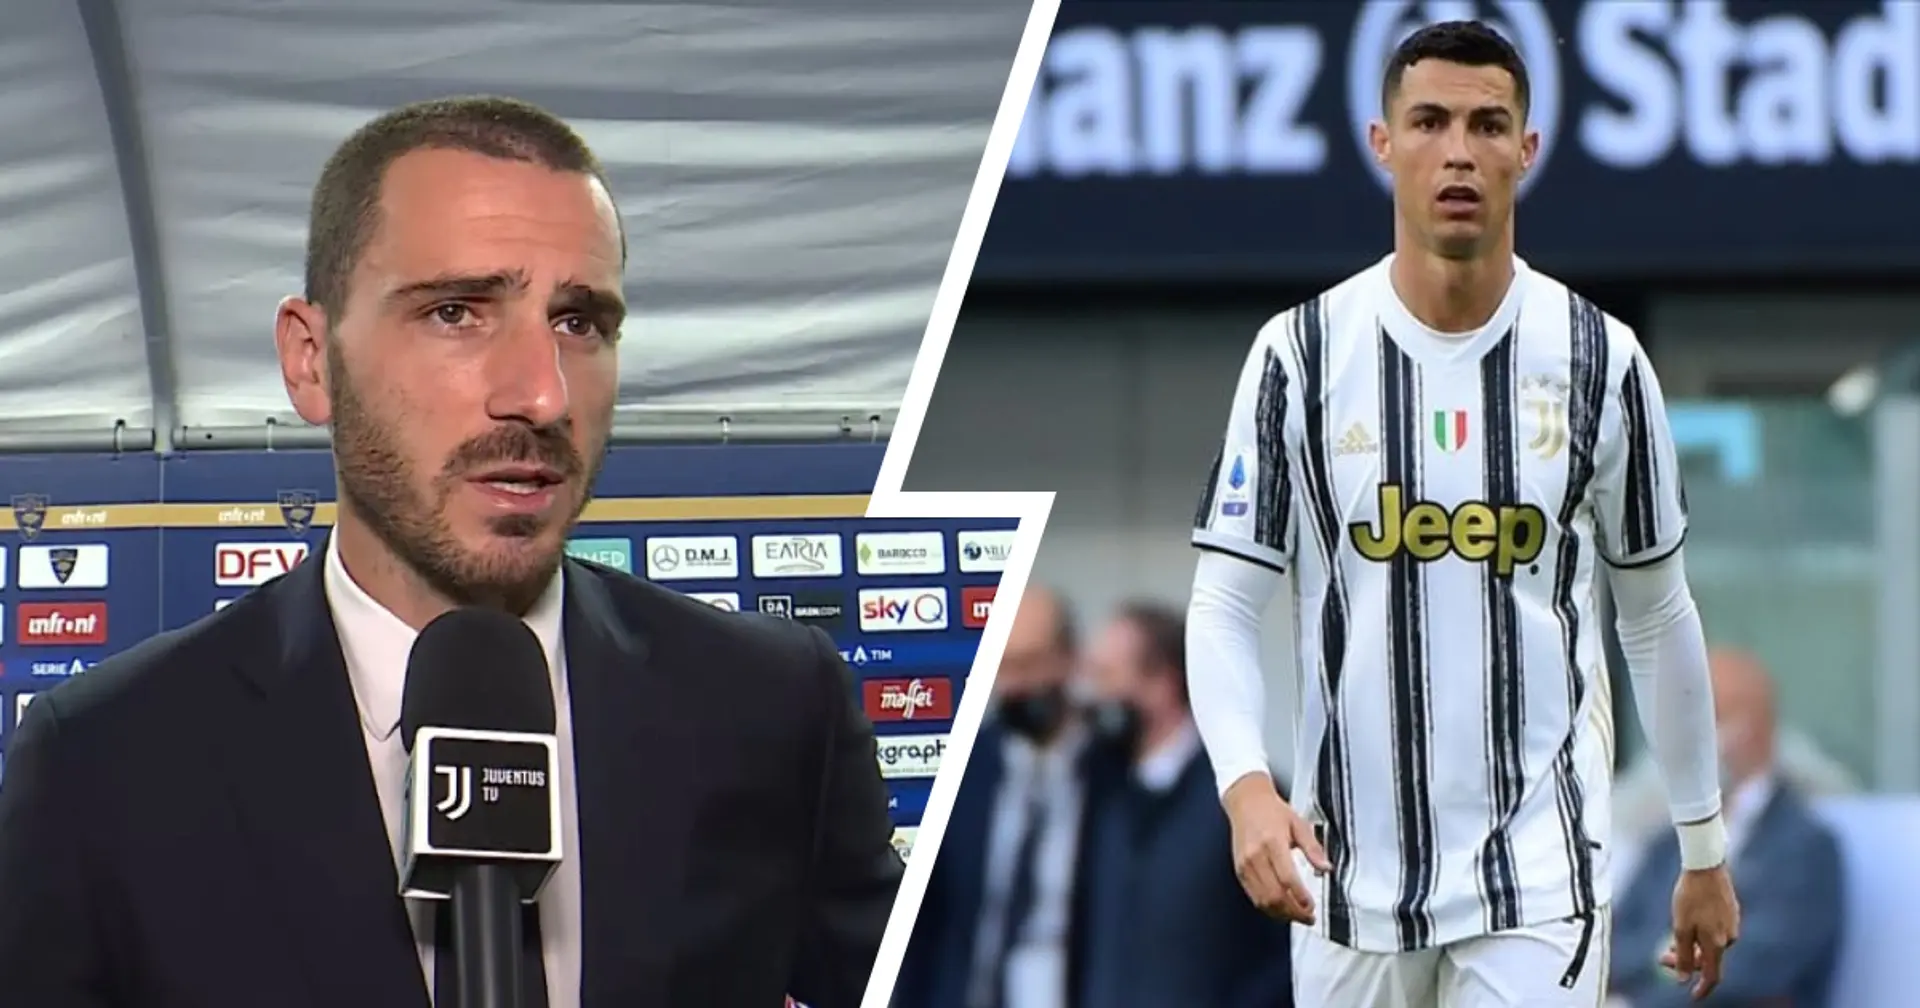 'We are rediscovering humility to win games': Bonucci suggests Juventus are better off without Ronaldo